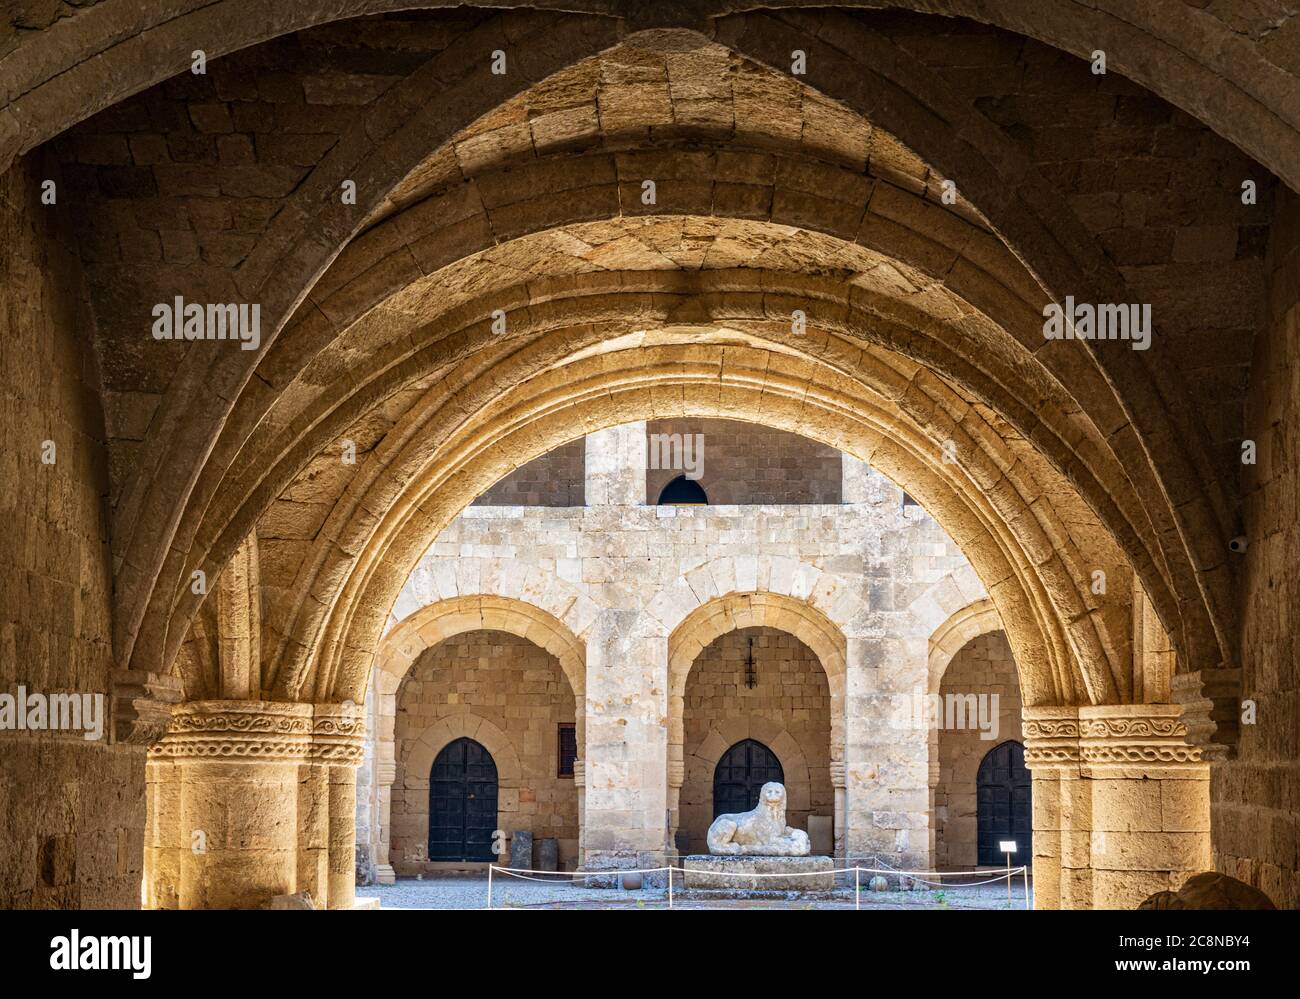 Vaulted entrance to the Archaeological Museum of Rhodes in the former hospital of the Knights of Saint John, Rhodes Town, Rhodes Island, Greece Stock Photo